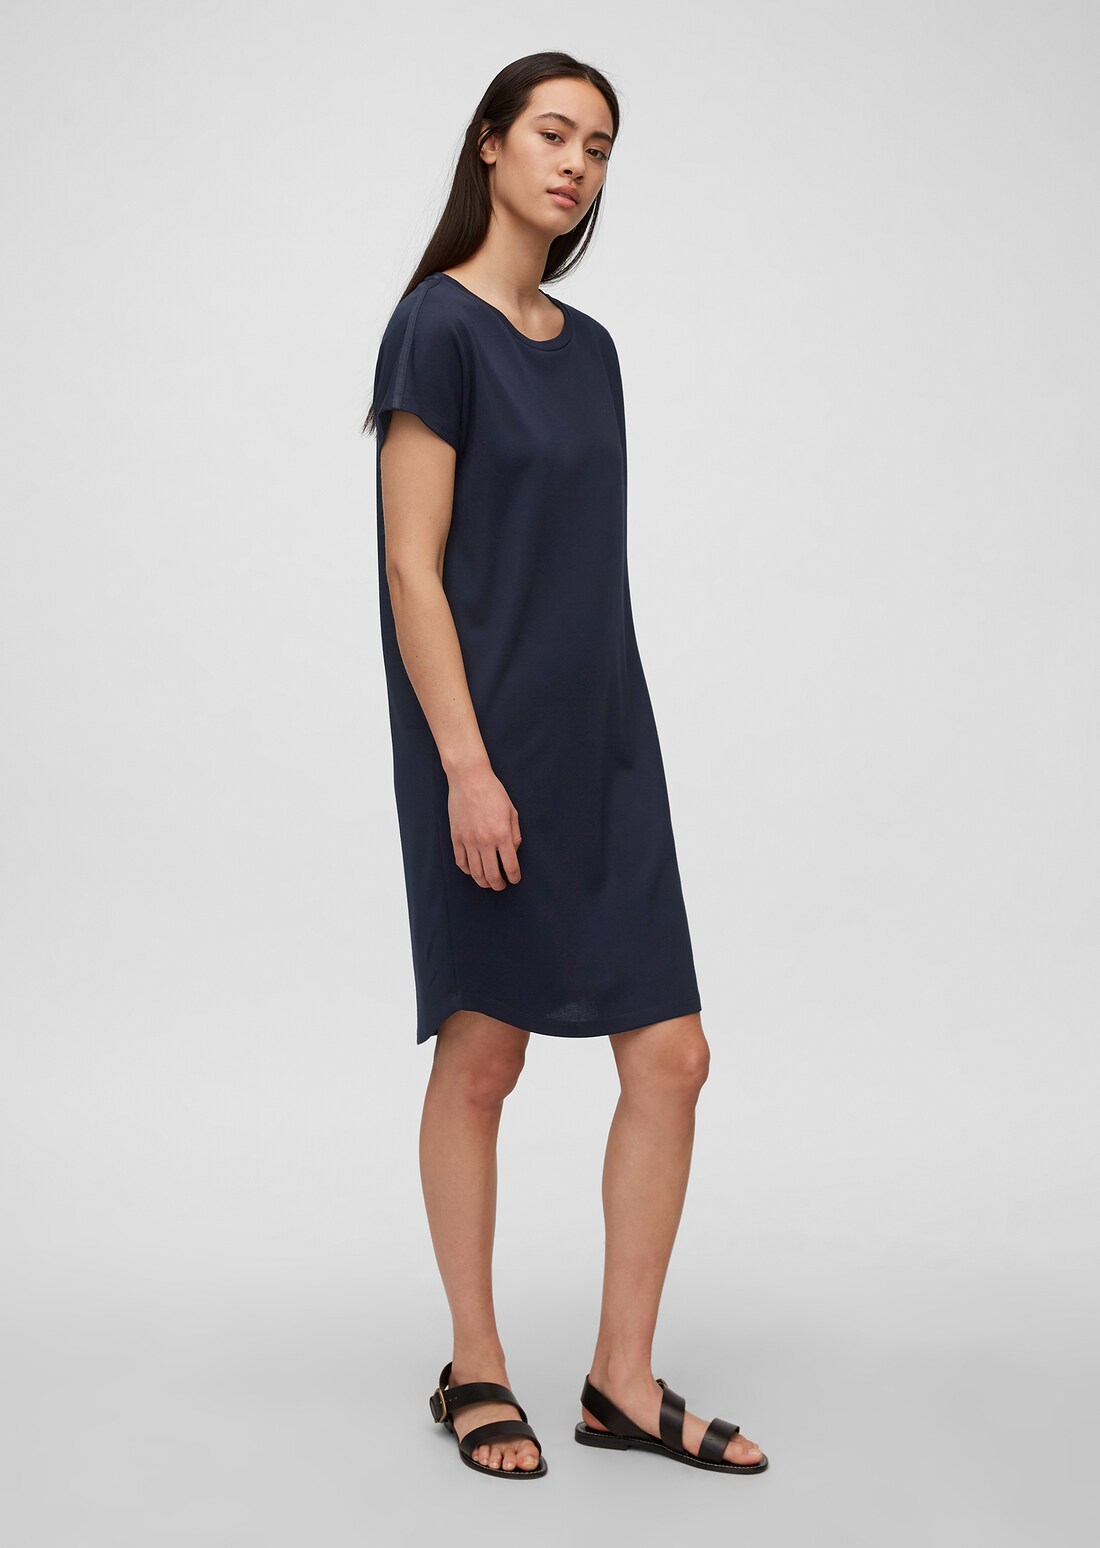 Jersey dress made of blended viscose - blue | Jersey dresses | MARC O’POLO